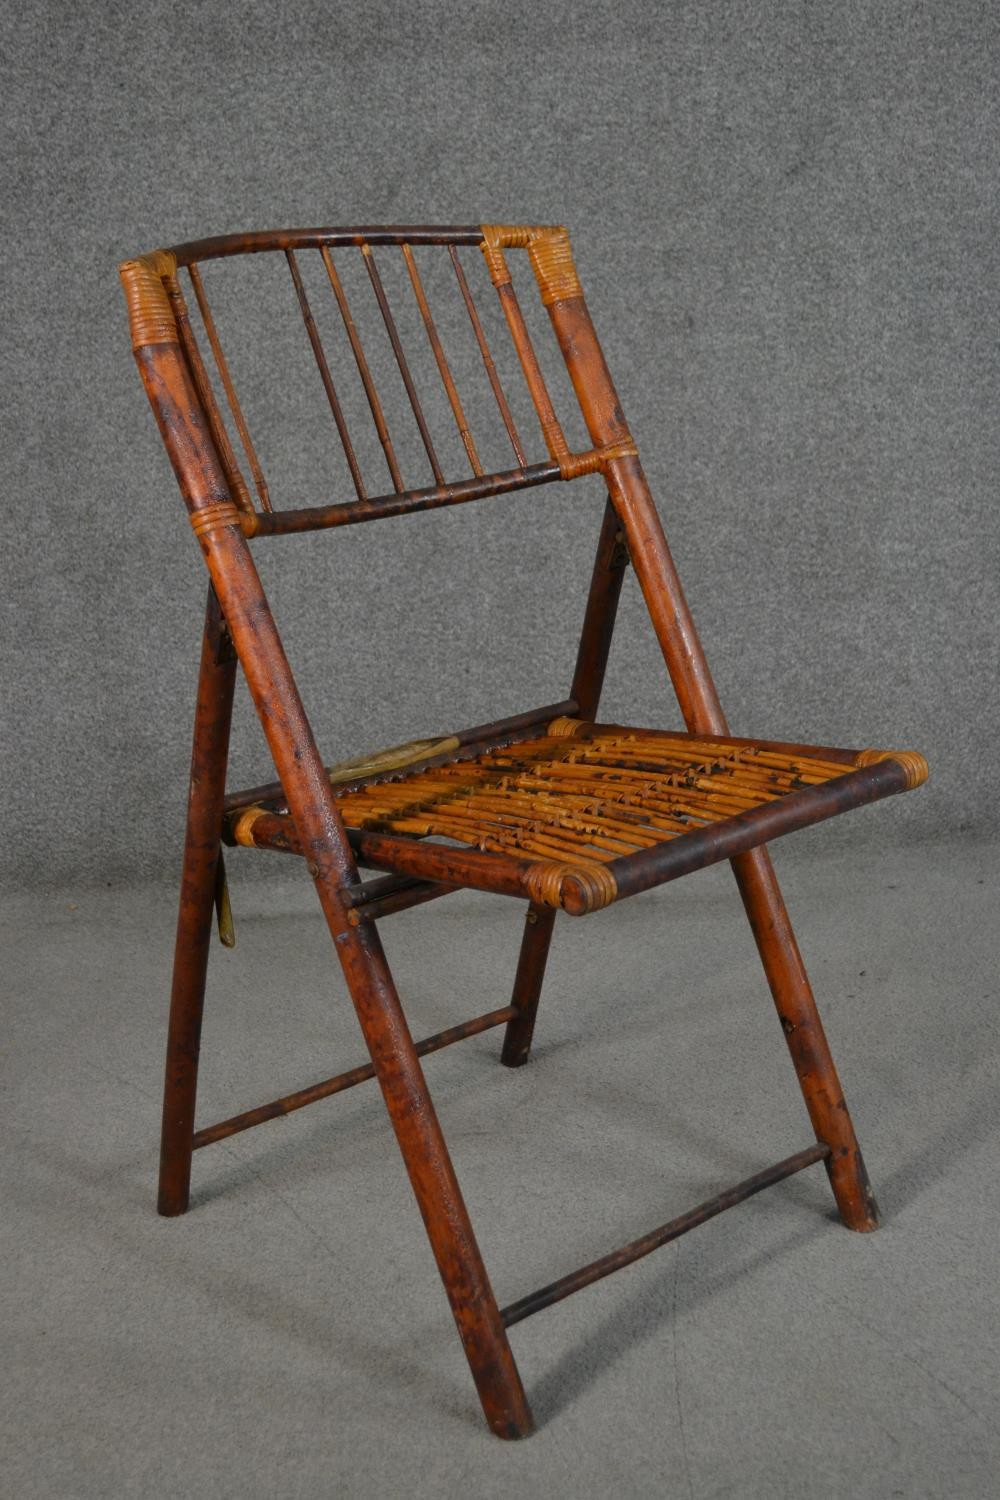 A folding bamboo chair, with a slatted back and seat. - Image 6 of 7